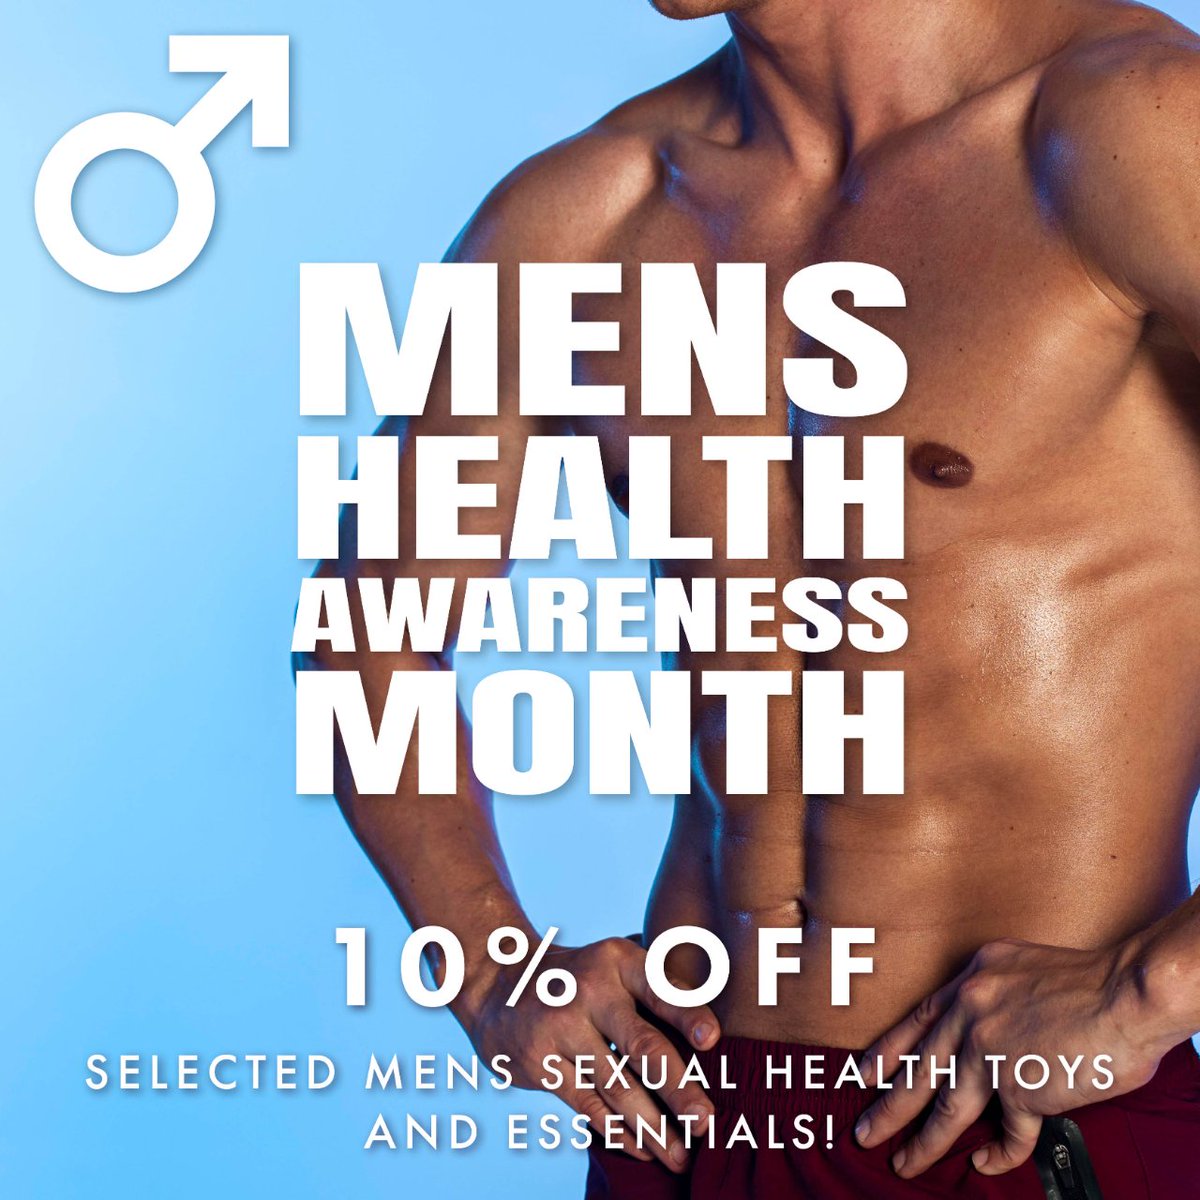 November is all about Men's Health, and at Prowler, we've got you covered. Check out our collection of men's toys for a healthier, happier you. Your self-care journey starts here. 💪🍆 #MensHealthNovember #ProwlerPleasure #SelfCareForHim